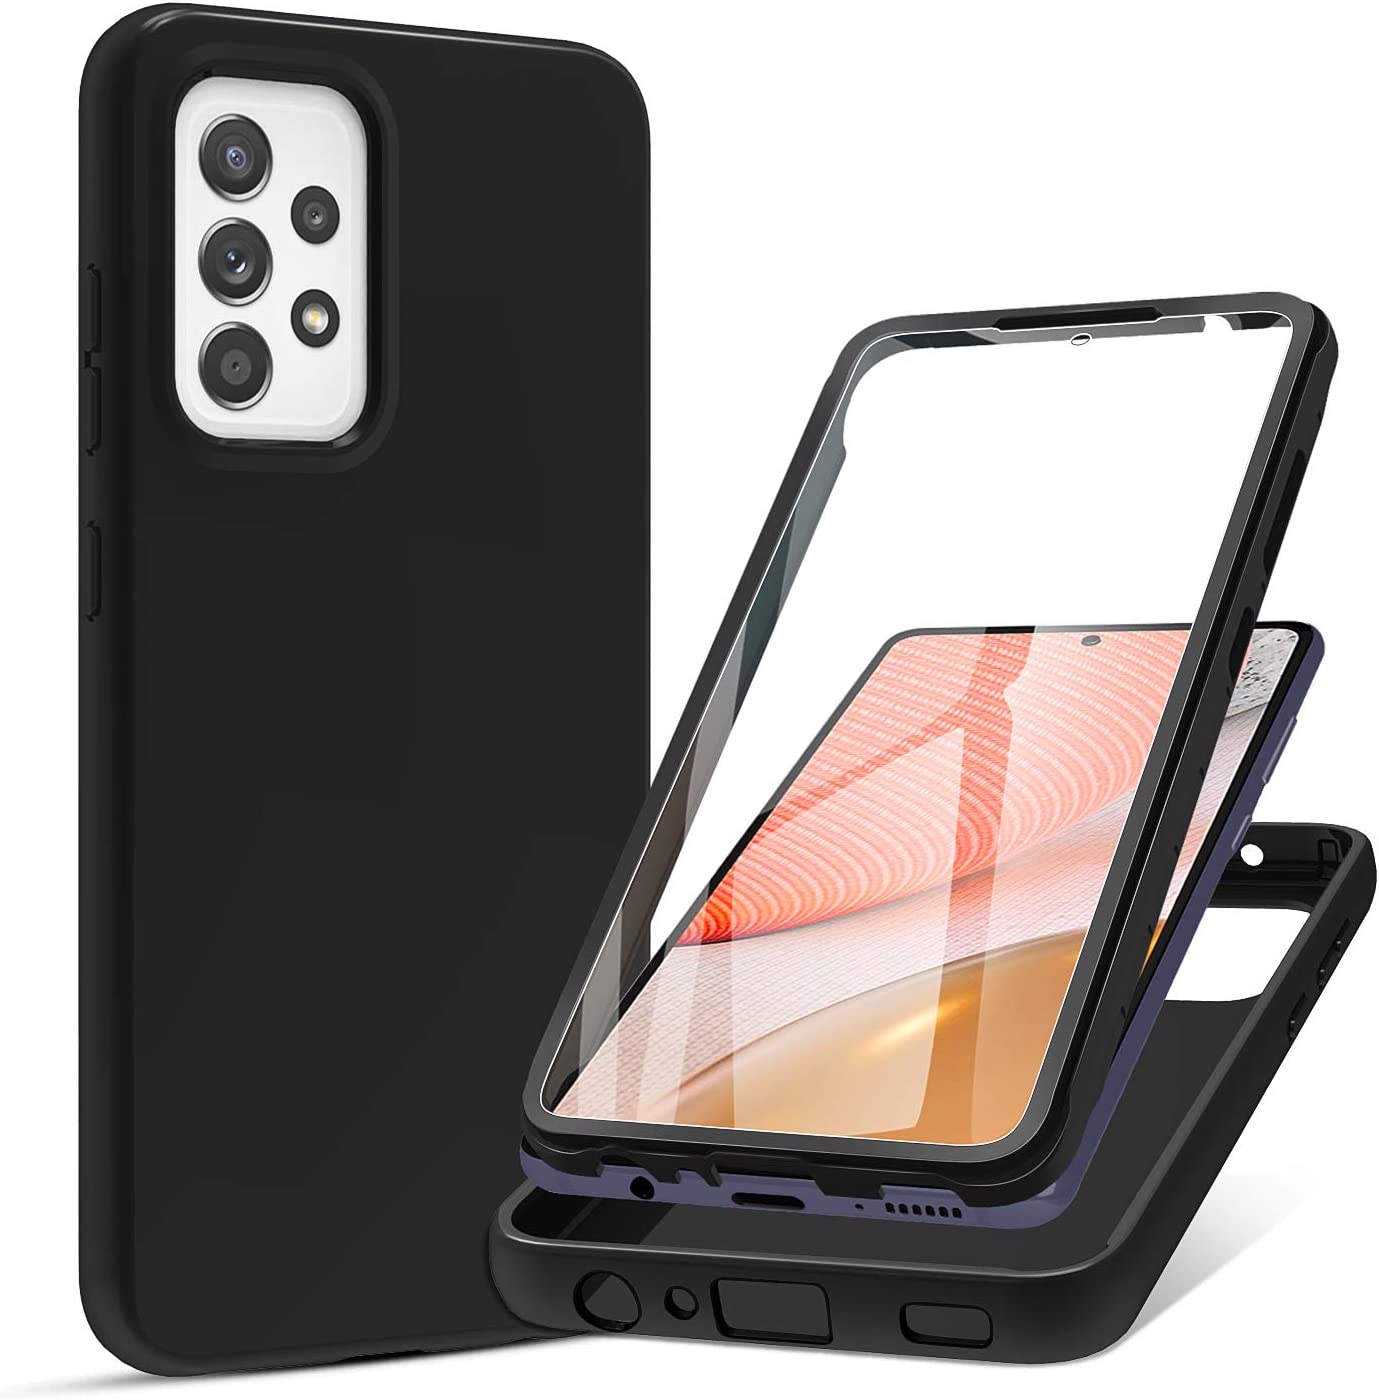 PULEN Samsung Galaxy A72 Case with Built-in Screen Protector,Rugged PC Front Cover+Soft Liquid Silicone Non-Slip Back Cover Shockproof Full-Body Protective - Black